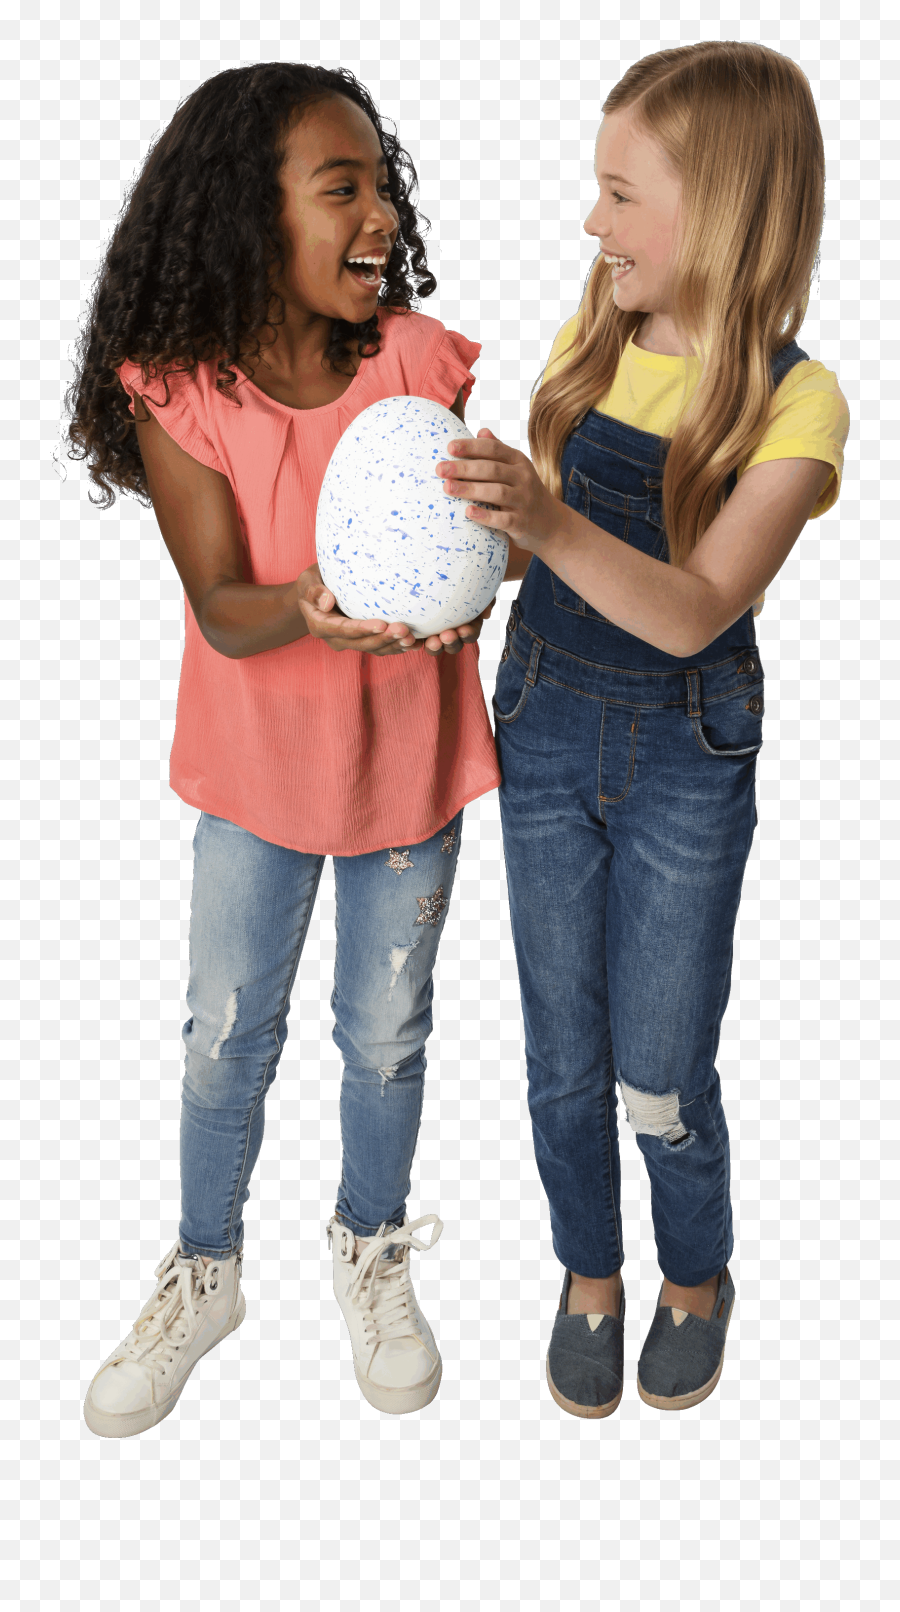 Download Hatchimals - Girl Full Size Png Image Pngkit Girl Toy Commercial Hatchimals,Hatchimals Png